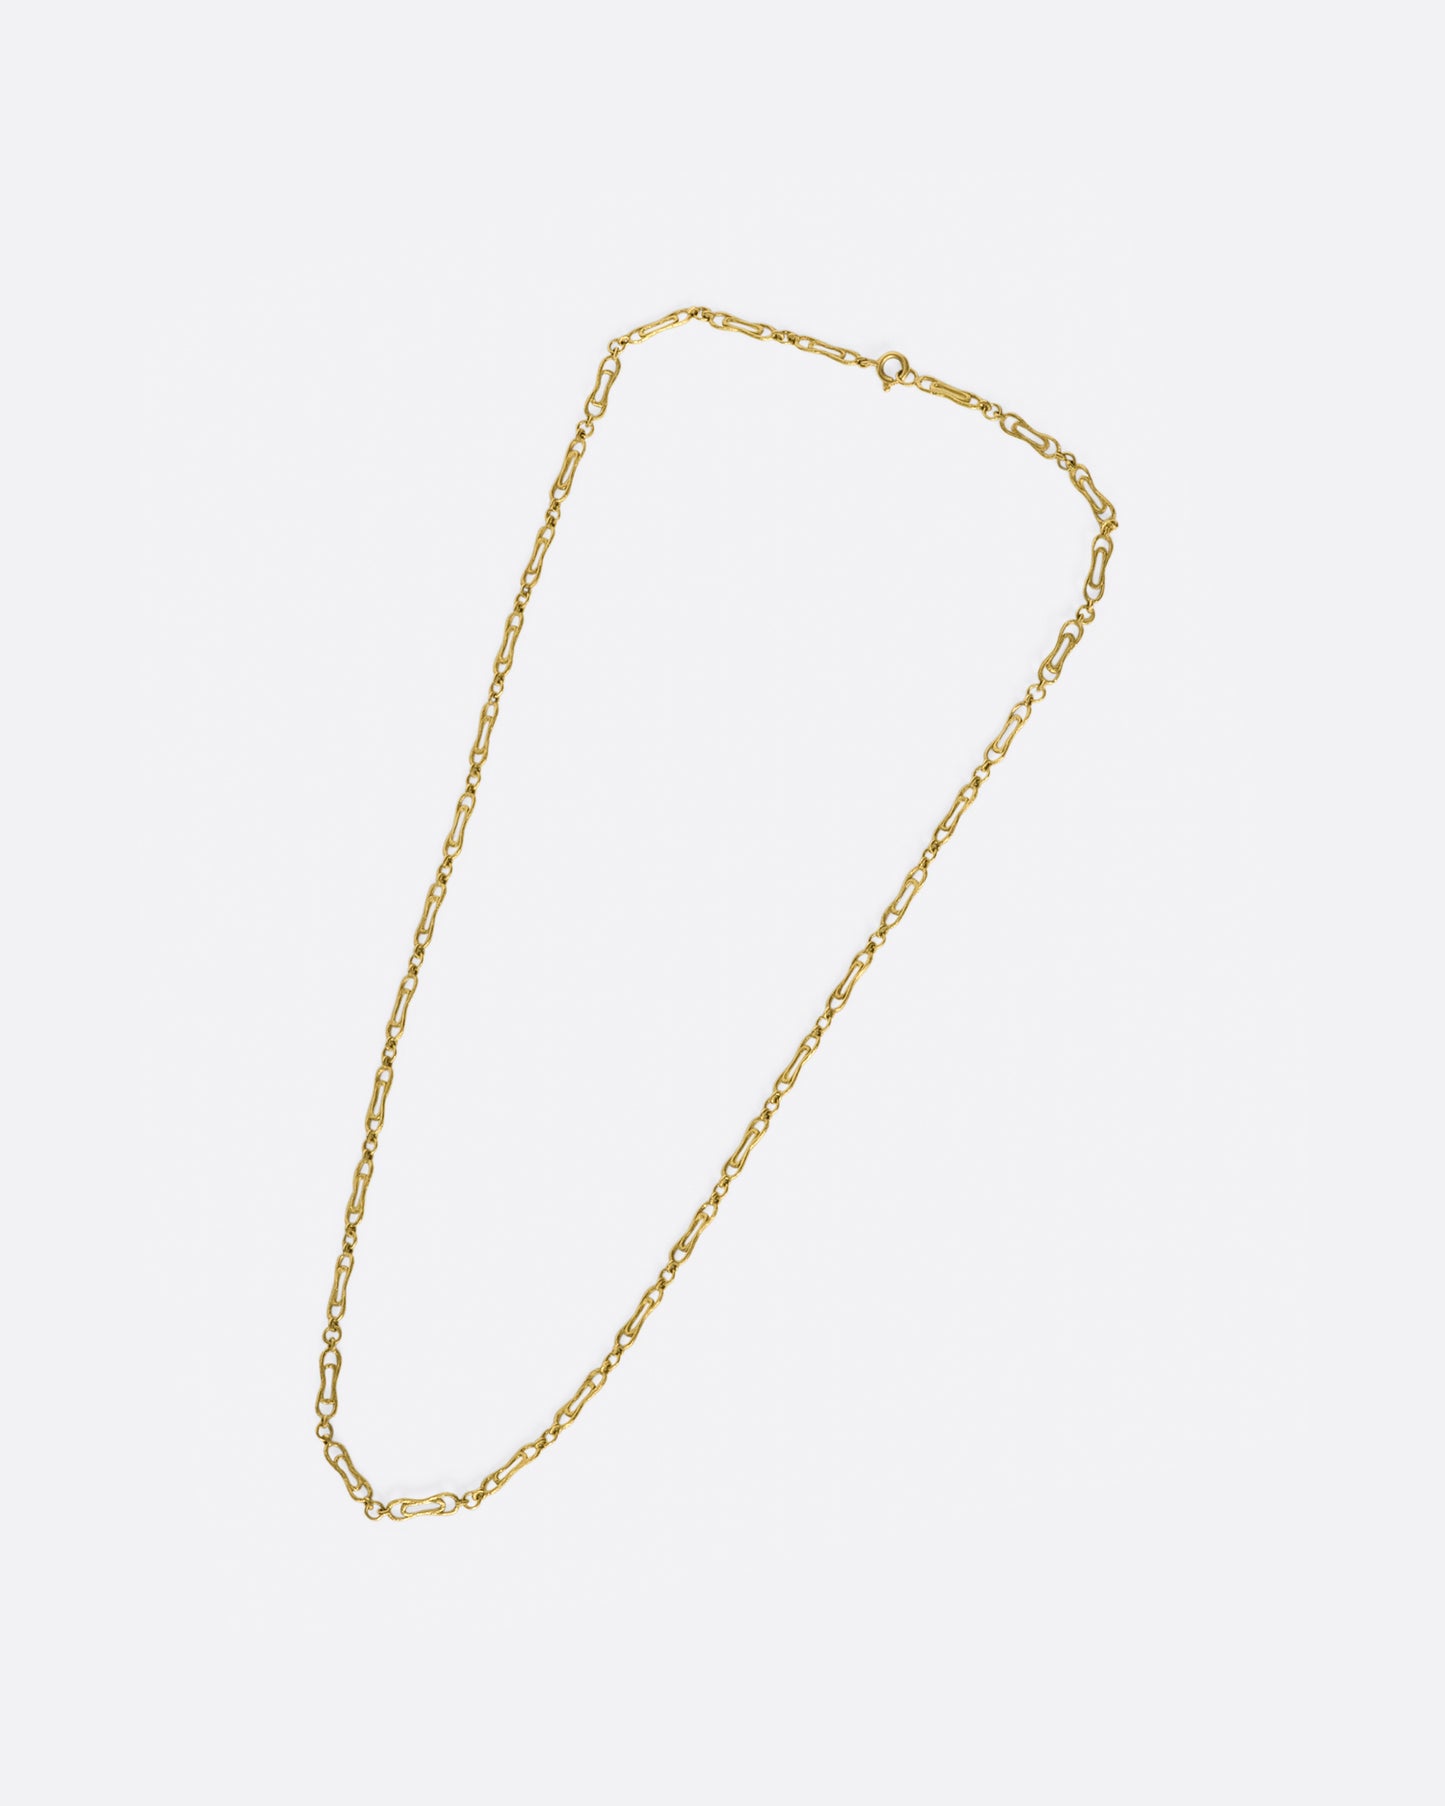 This handmade chain is just as glorious on its own as it is with a pendant or two.